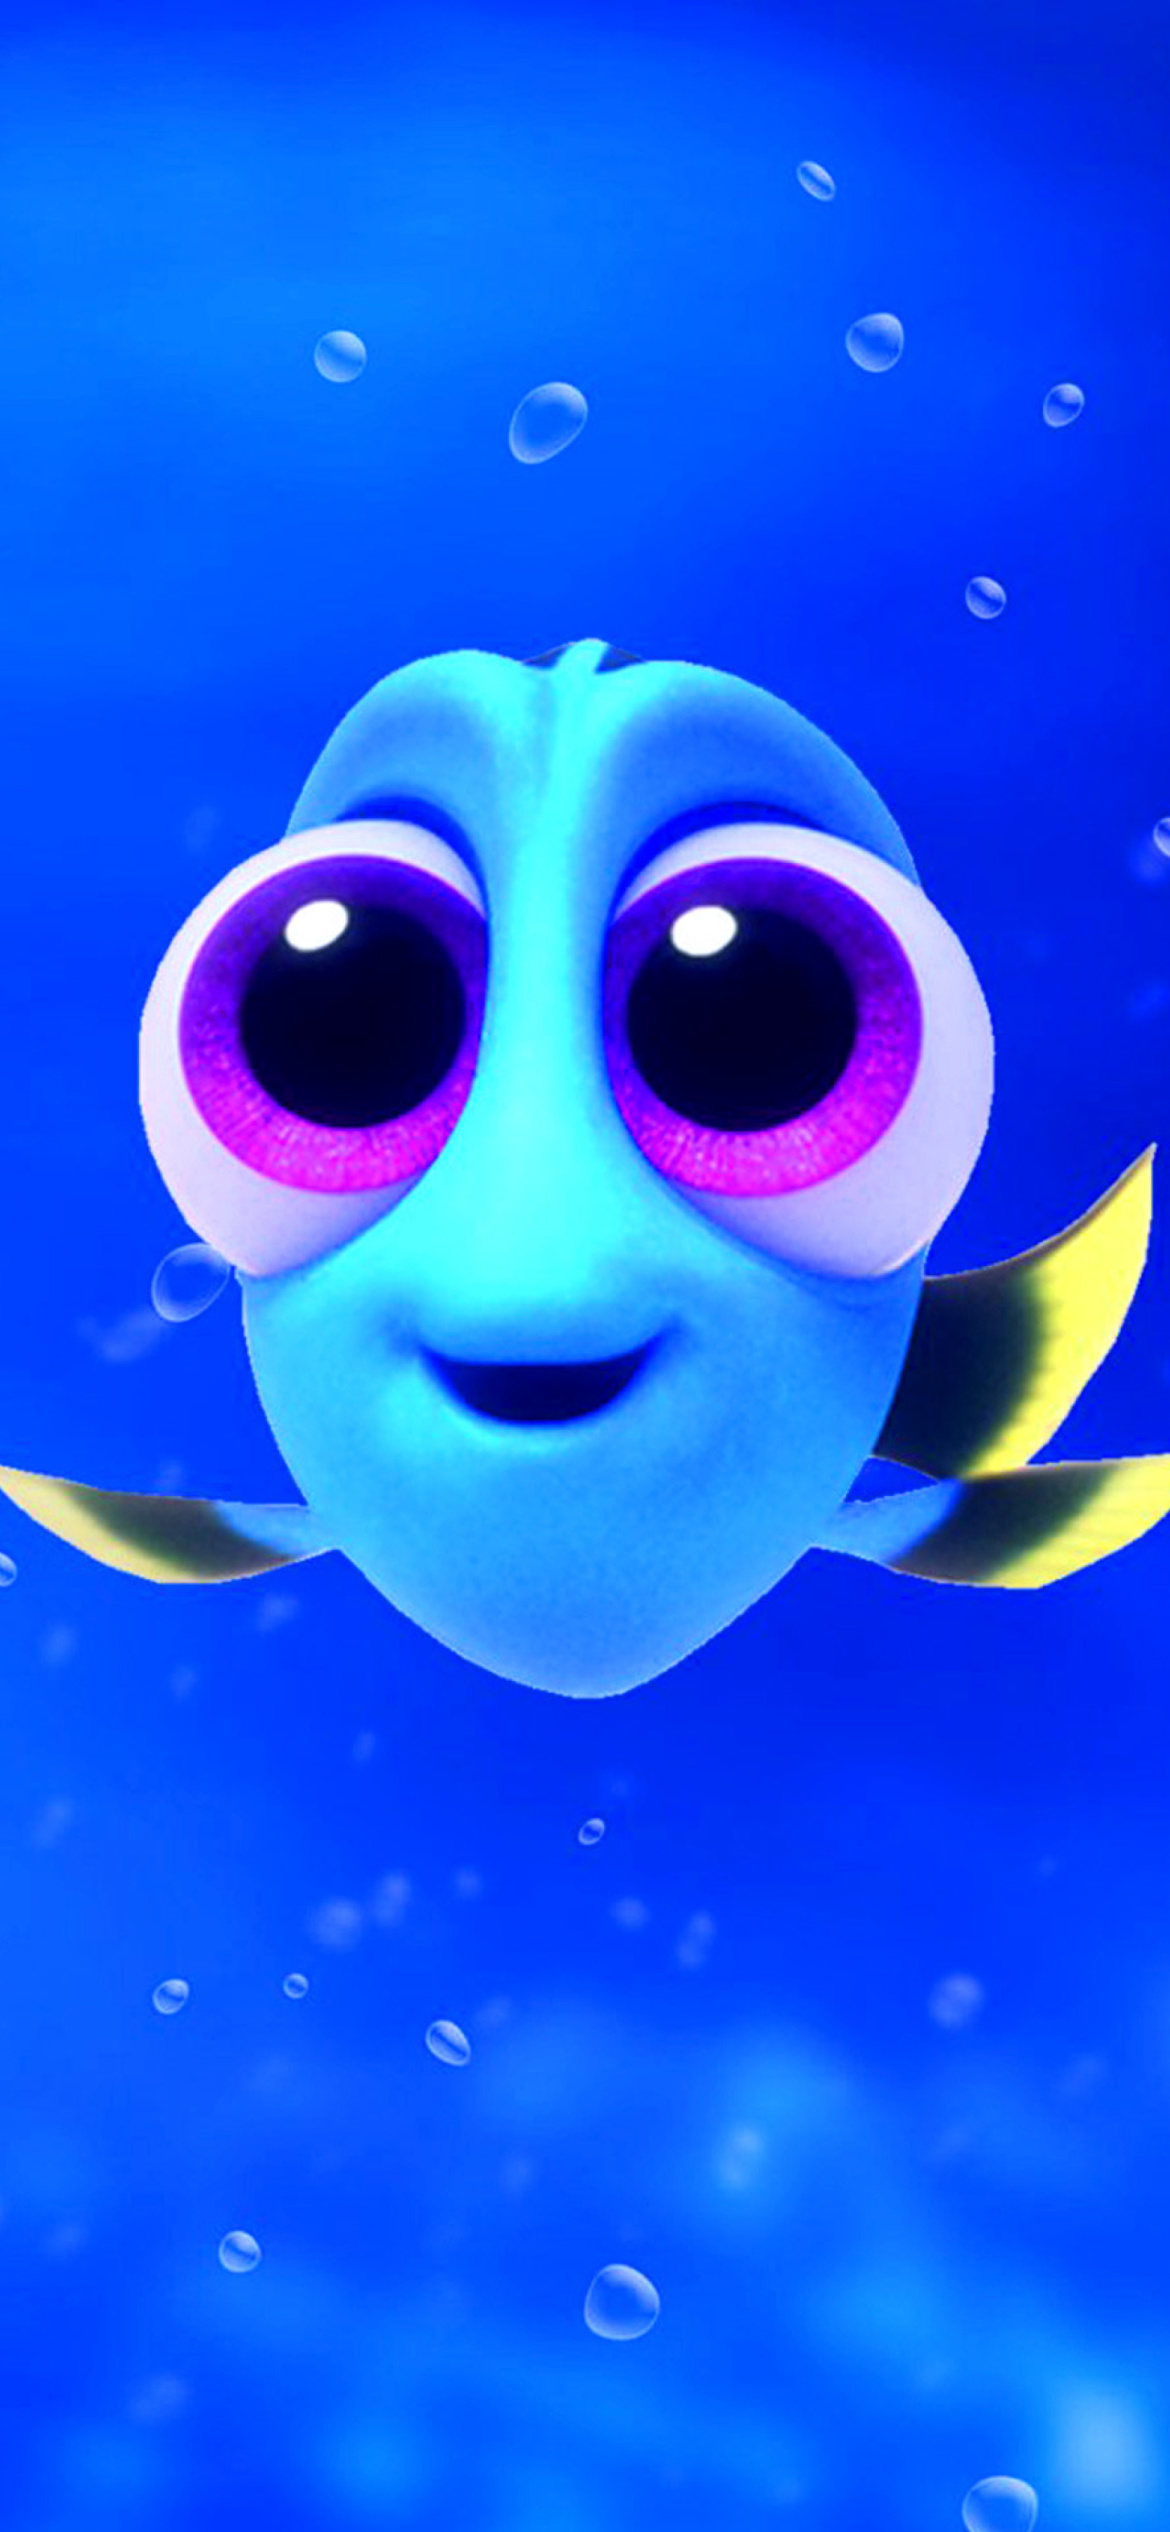 Finding Dory wallpaper 1170x2532